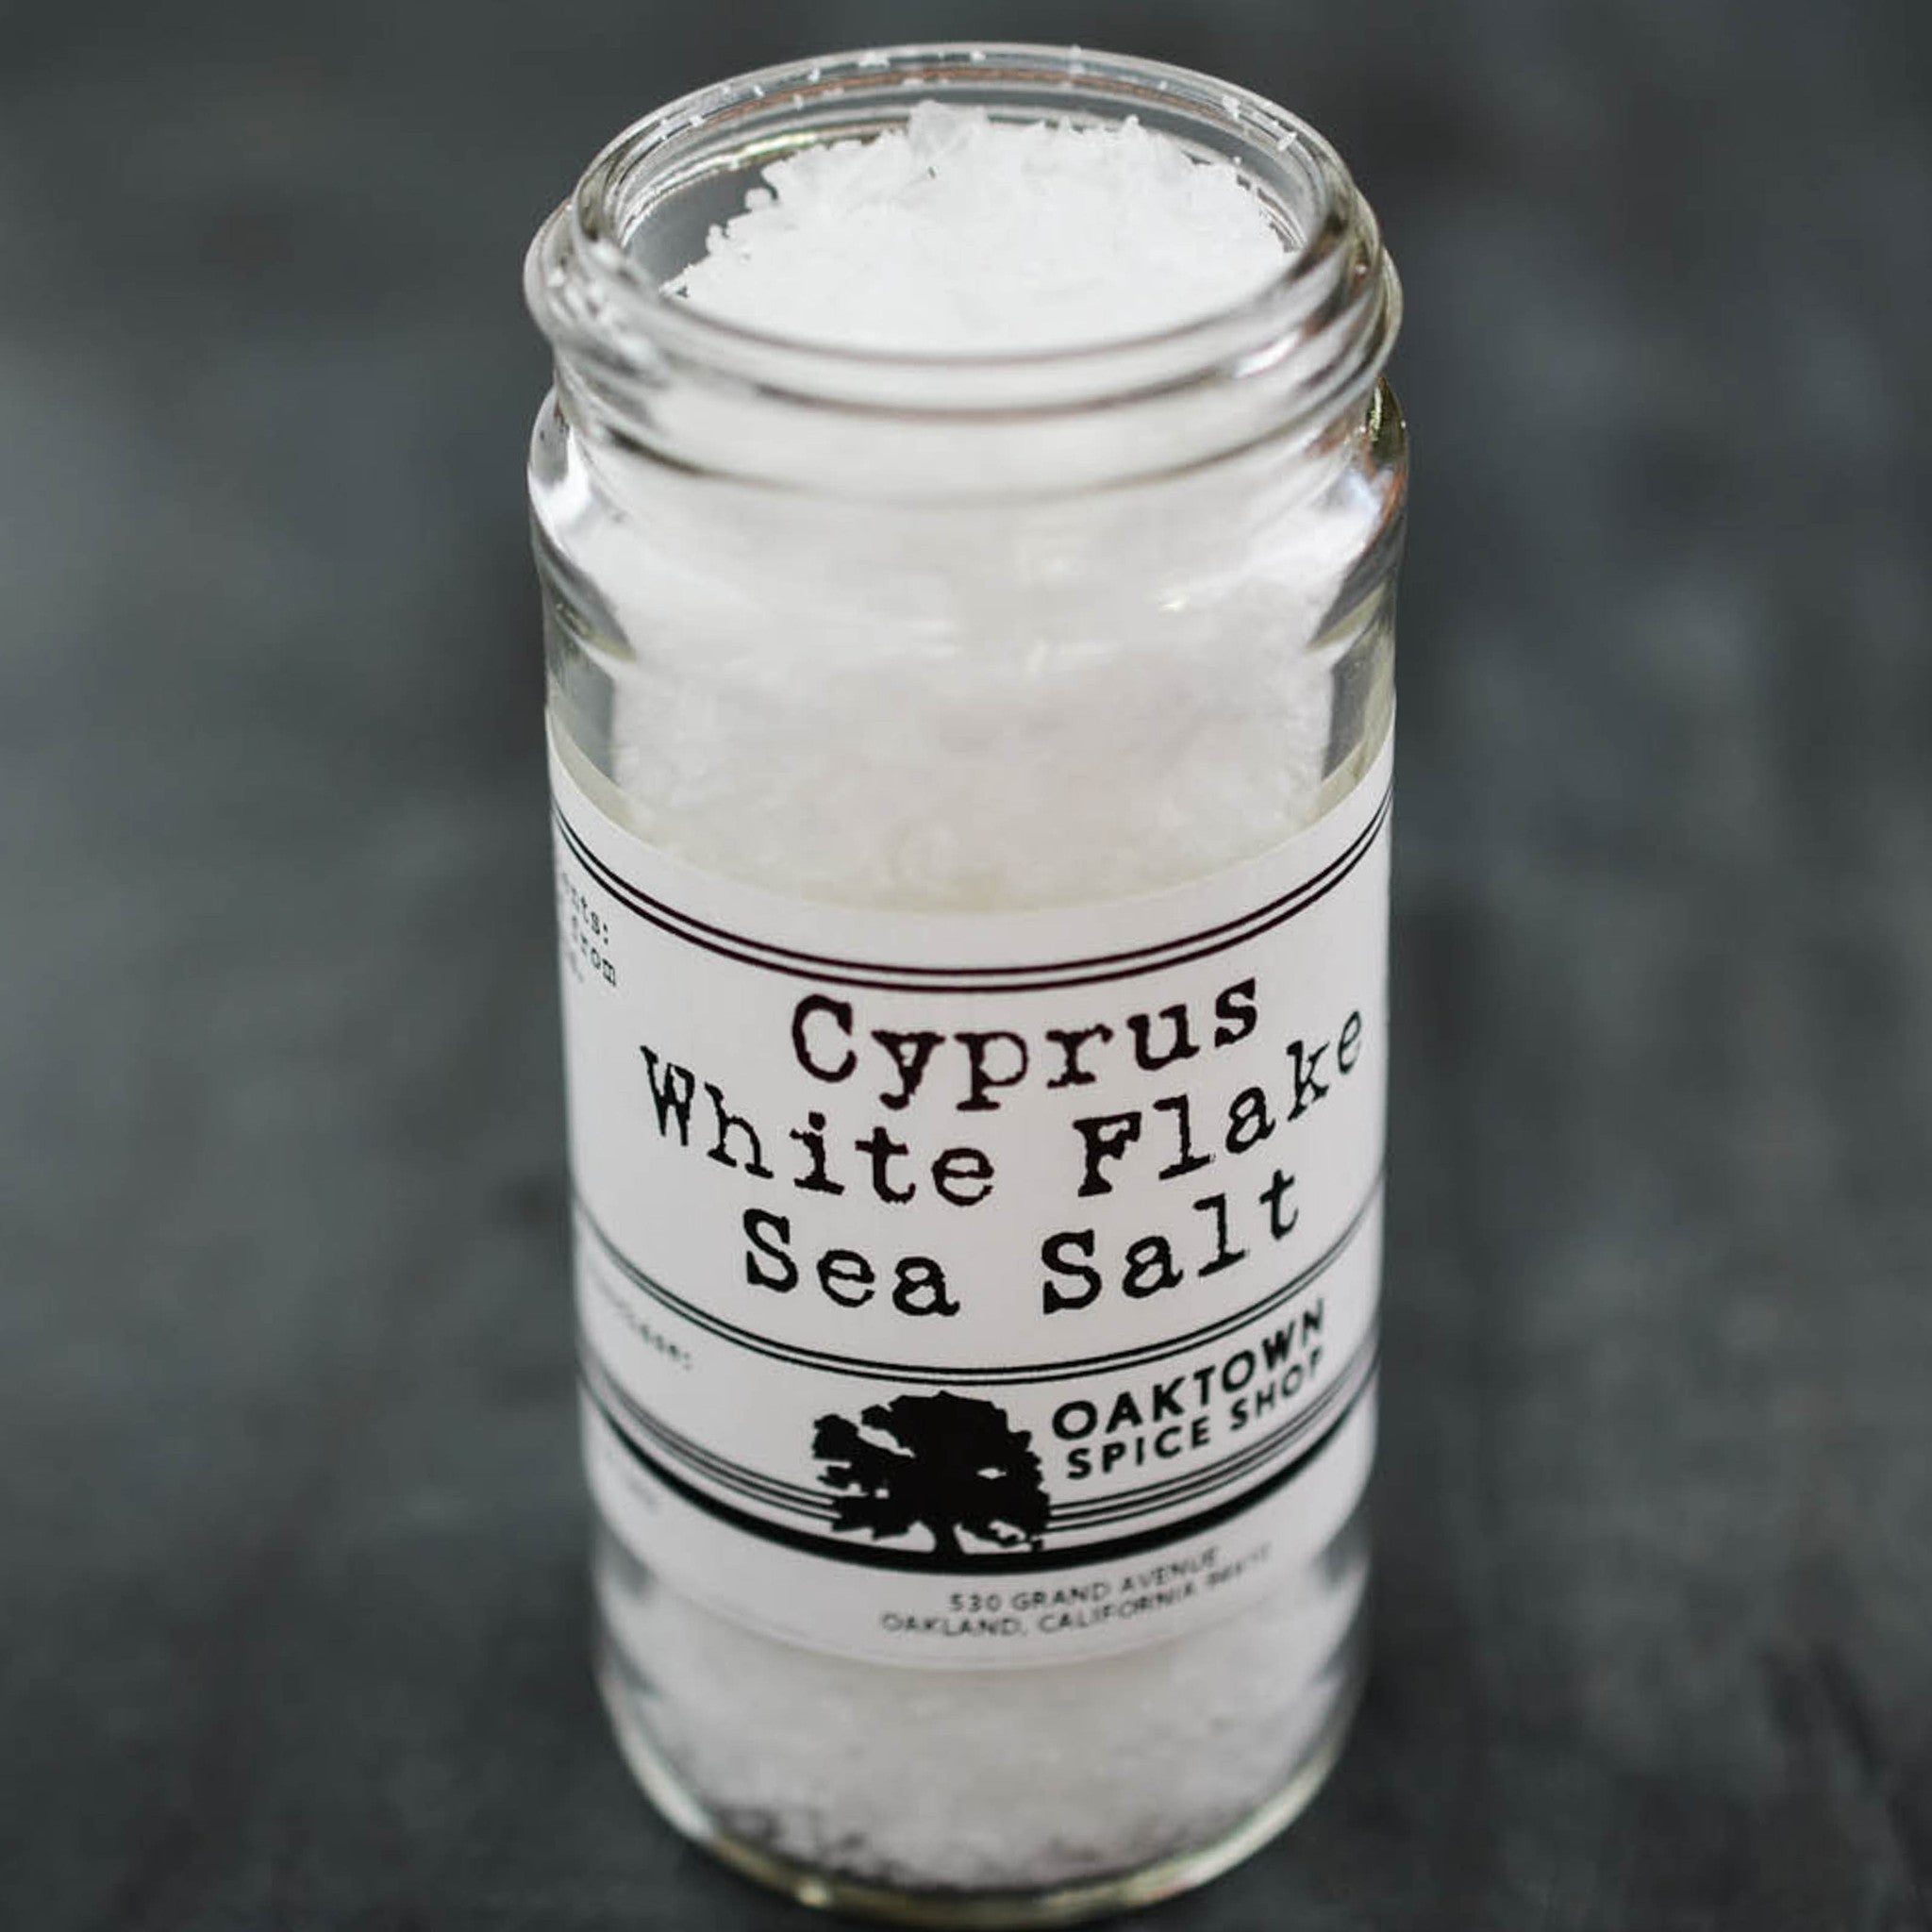 Cyprus White Flake Sea Salt by Oaktown Spice Shop are large broad flakes from the Island of Cyprus are soft enough to crunch between your fingers and provide a lovely finish to every bite